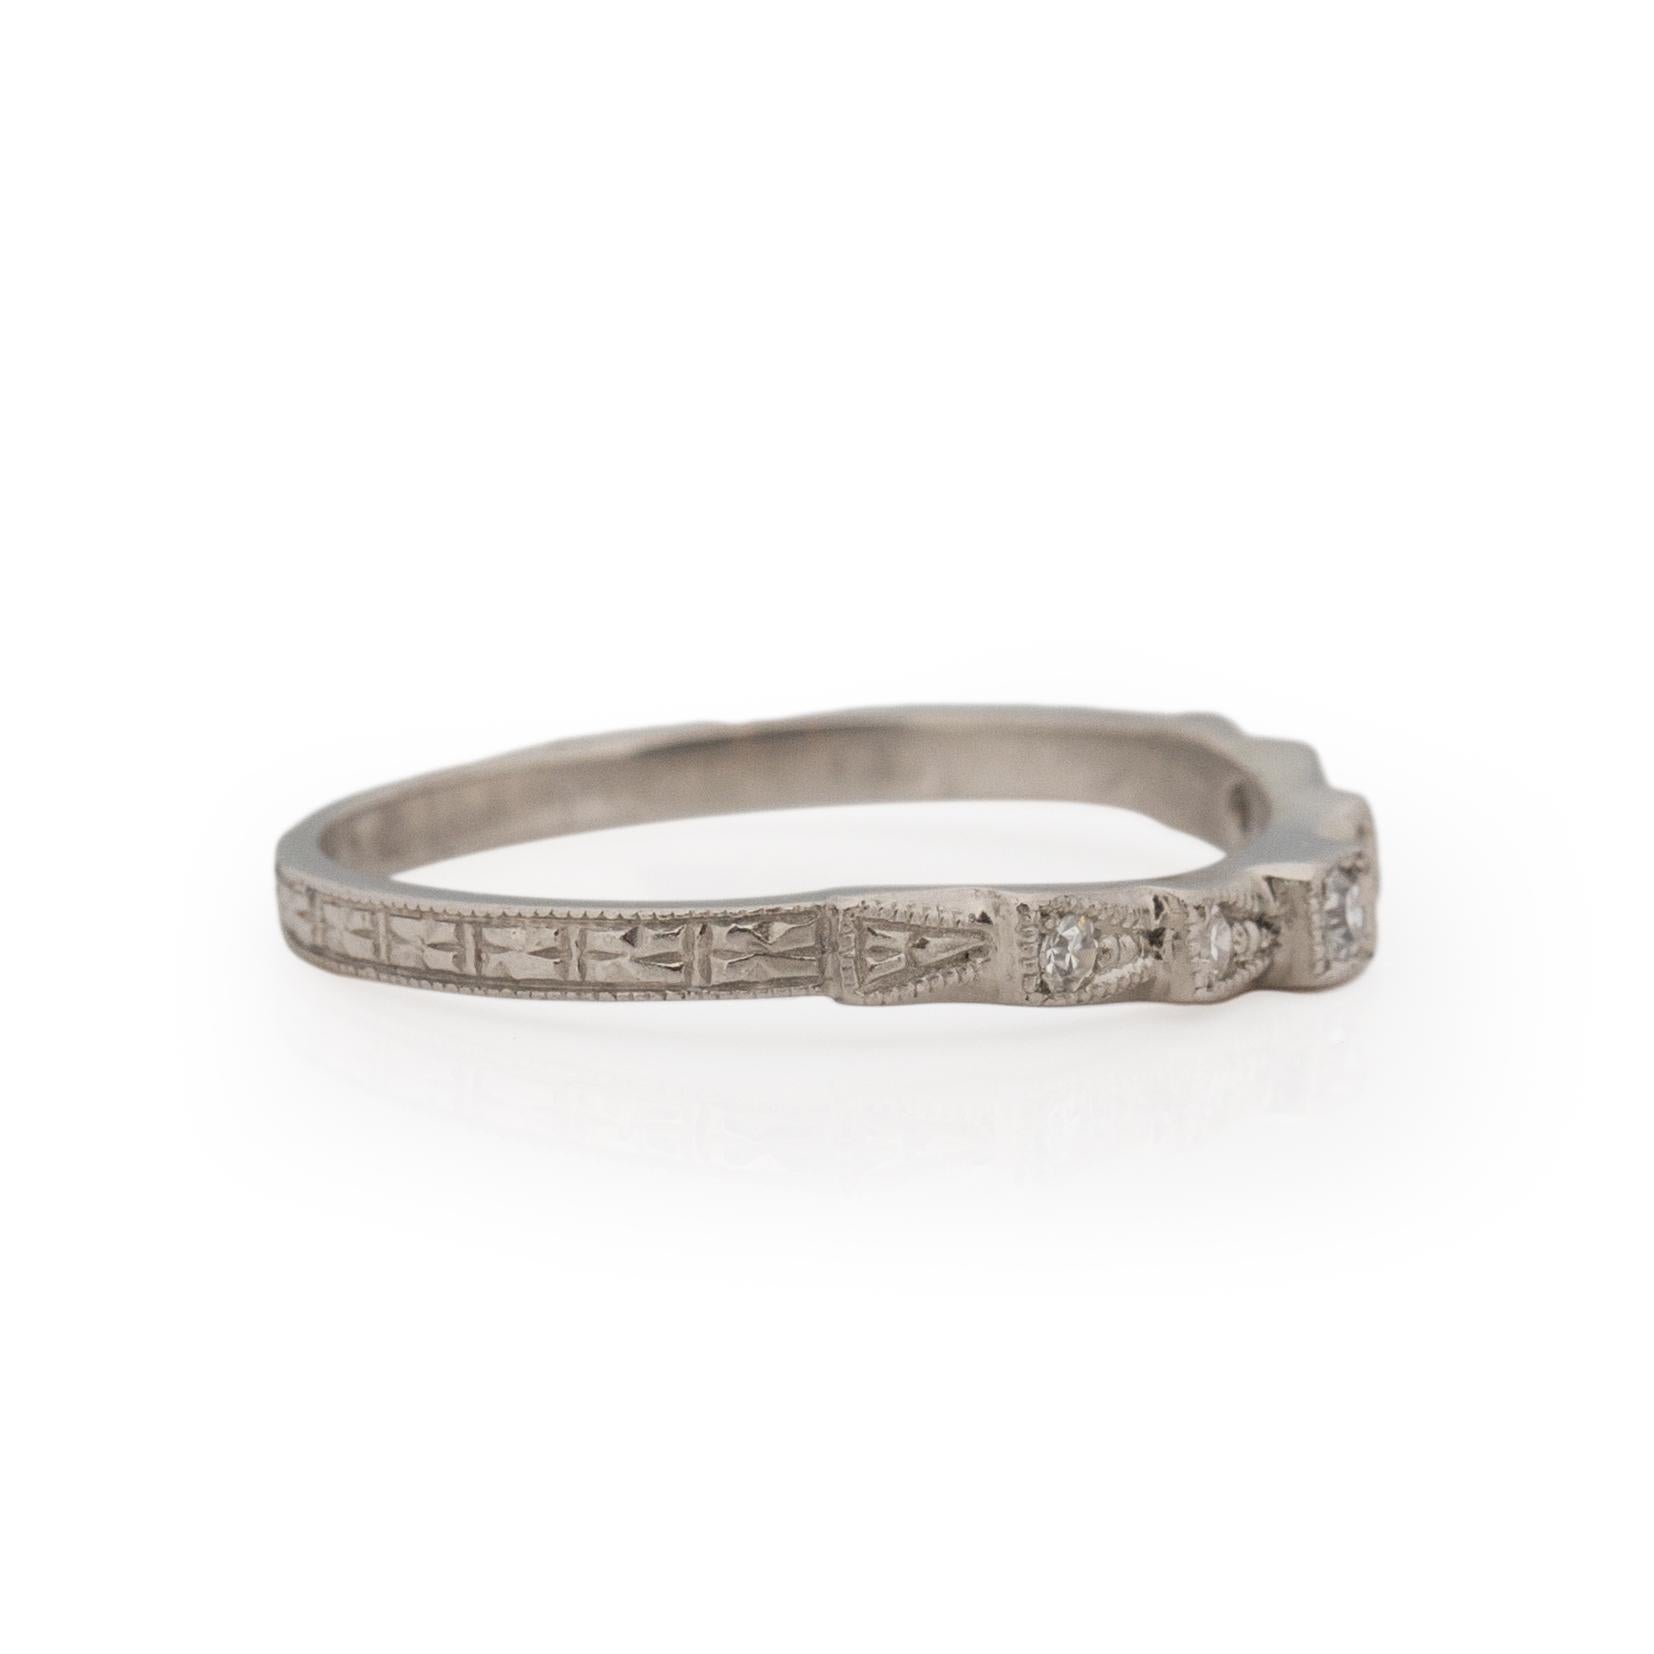 This exquisite art deco band has an outstanding design! Crafted in platinum, the shanks support a beautifully carved floral like pattern, this pattern leads you to a delicate step shape, nestled into the steps are single cut diamonds that give this